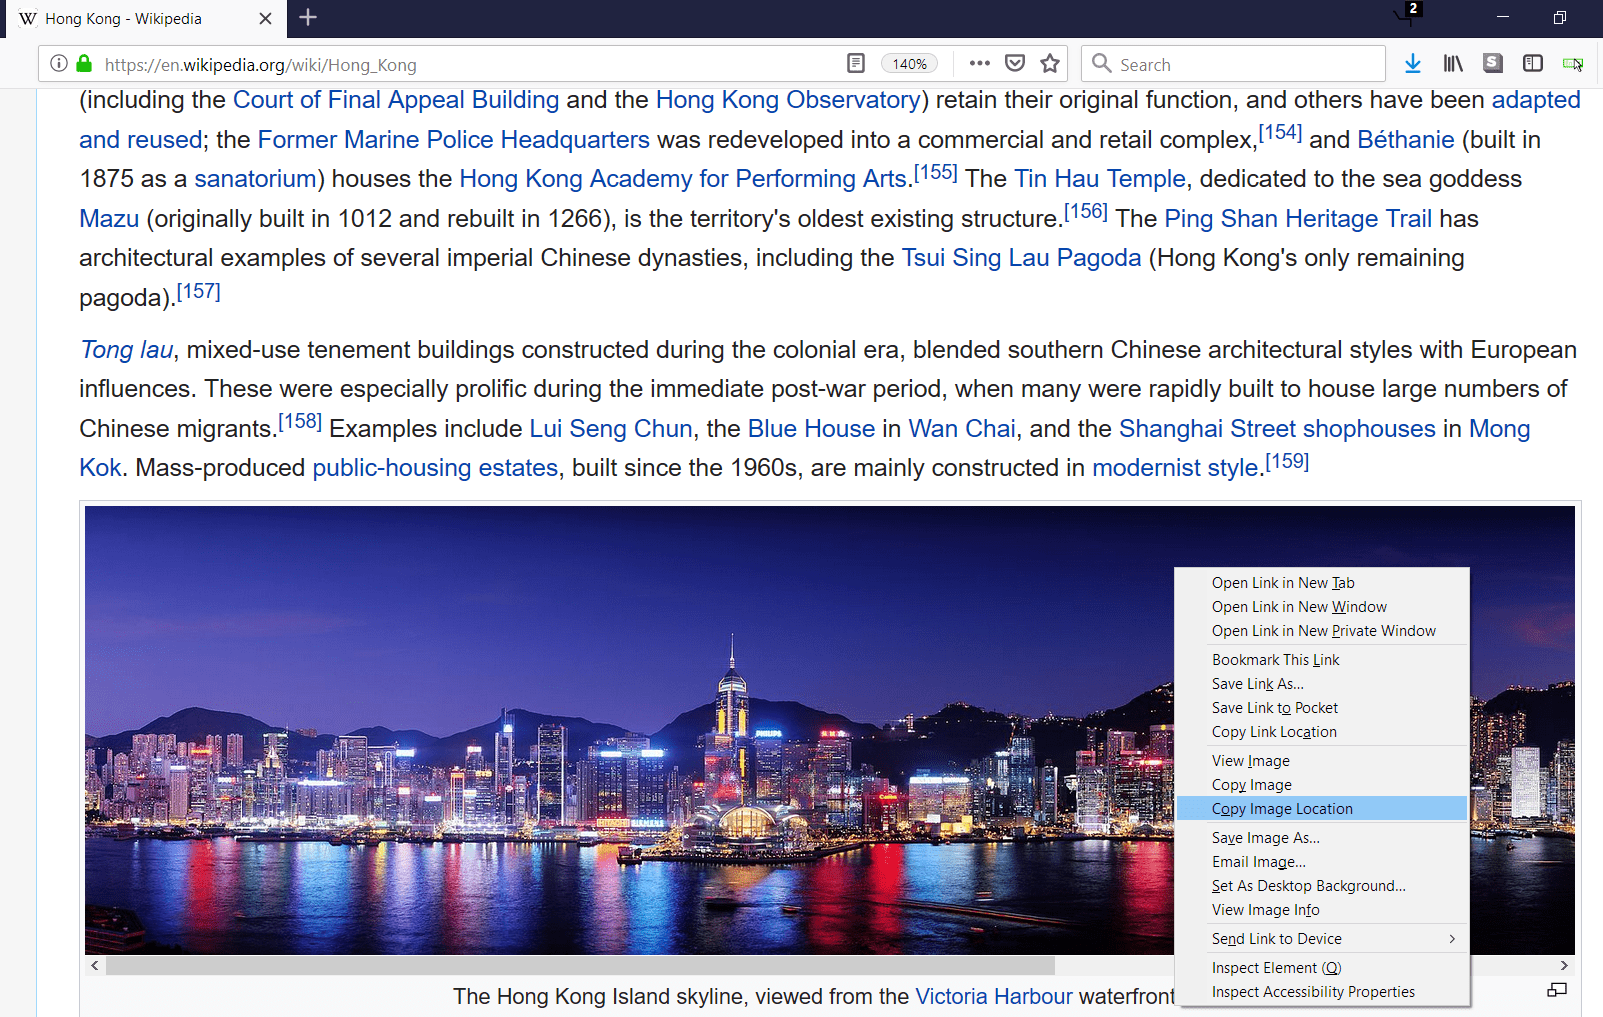 Screenshot of HK Wikipedia Page and the Copy Image Location option of the right-click menu highlighted